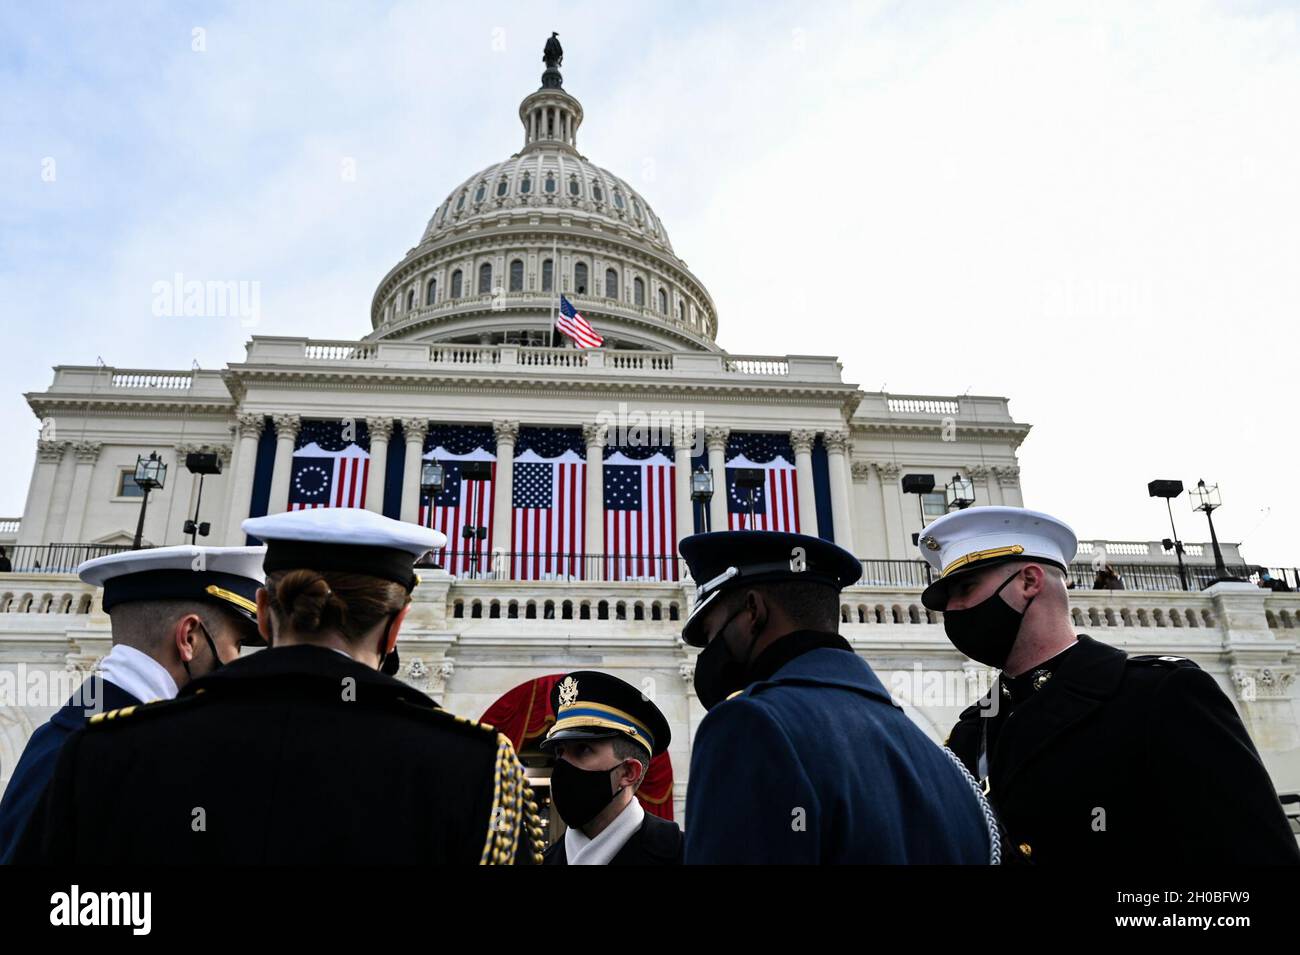 Members from each service brances discuss their roles during rehersal for the 59th Presidential Inauguration in Washington, D.C., Jan. 18 2021. More than 5,000 military members from across all branches of the armed forces of the United States, including reserve and National Guard components, provided ceremonial support and Defense Support of Civil Authorities during the inaugural period.. Stock Photo